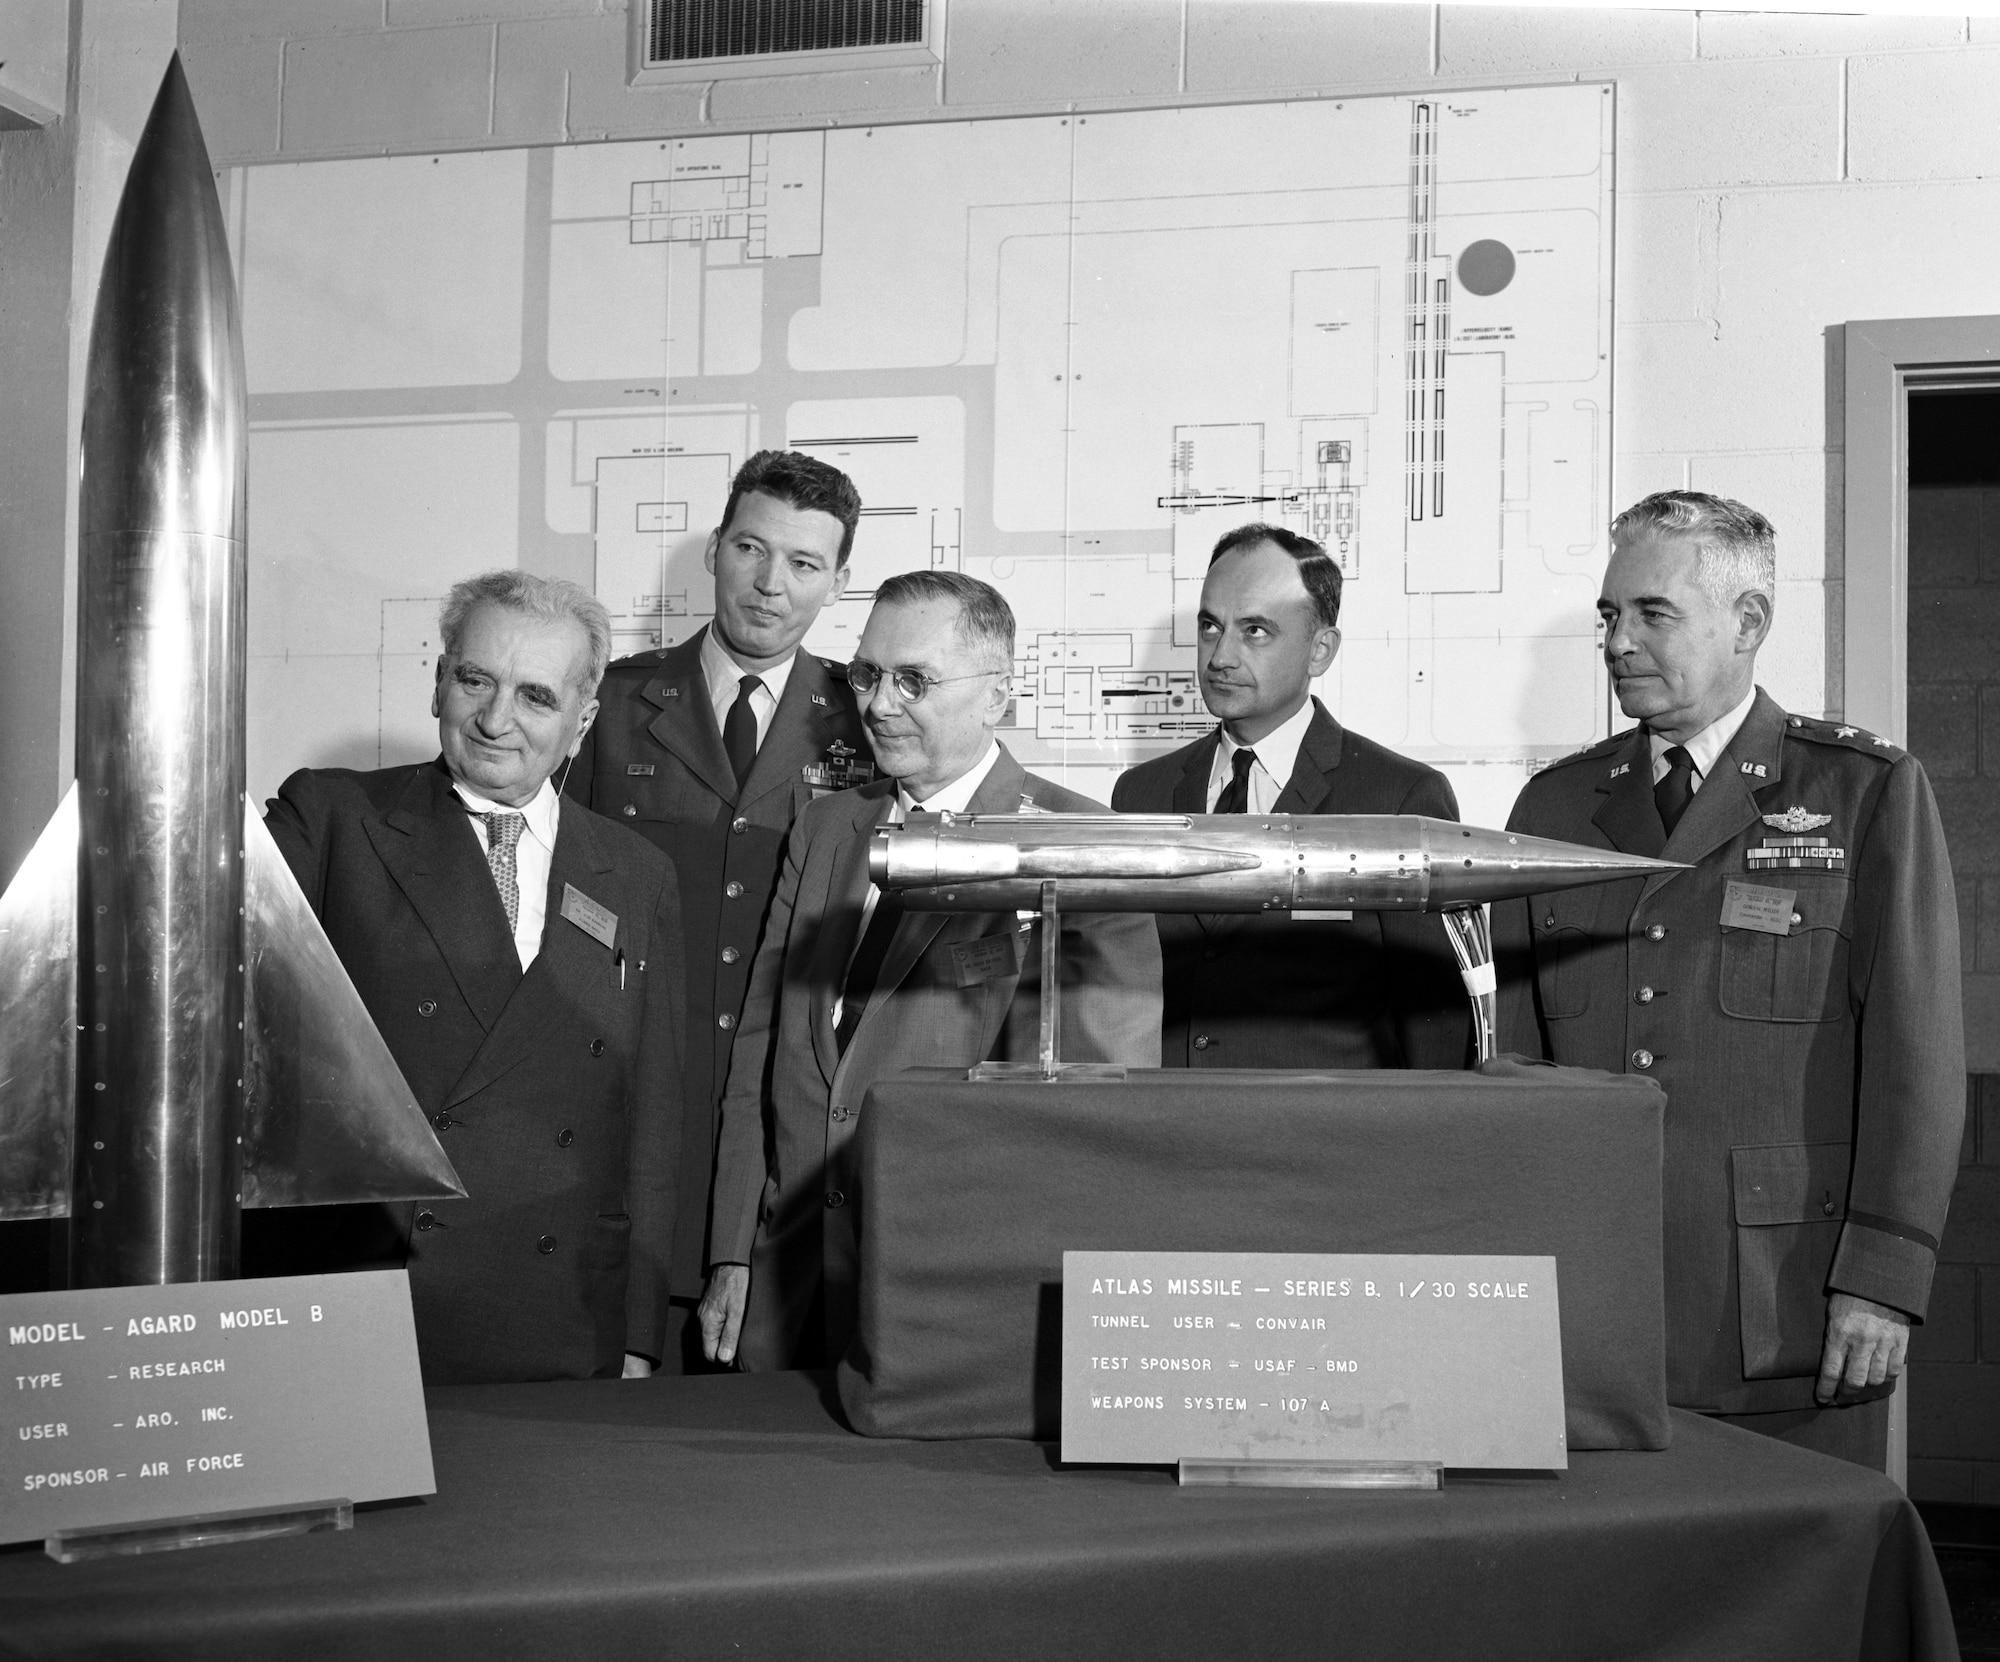 Dr. Theodore von Kármán, left, is joined by Air Force and NASA officials while inspecting two of the models used in the high velocity, high altitude wind tunnels at Arnold Air Force Base, Tenn. Von Kármán was able to get an up-close look at the models during the Oct. 30, 1959, dedication of the Gas Dynamics Facility at Arnold AFB in his honor. The site, now the headquarters of Arnold Engineering Development Complex, is the result of recommendations von Kármán made in 1945 to the late Gen. Hap Arnold, then-commander of the American Air Forces. Pictured with von Kármán are, from left, then-Lt. Gen. Bernard A. Schriever, then-commander of the Air Research and Development Command; Dr. Hugh Dryden, then-deputy administrator of the National Aeronautics and Space Administration; Dr. J.V. Charyk, then-assistant secretary of the Air Force for research and development; and then-Maj. Gen. Troup Miller Jr., then-commander of the AEDC. (U.S. Air Force photo)